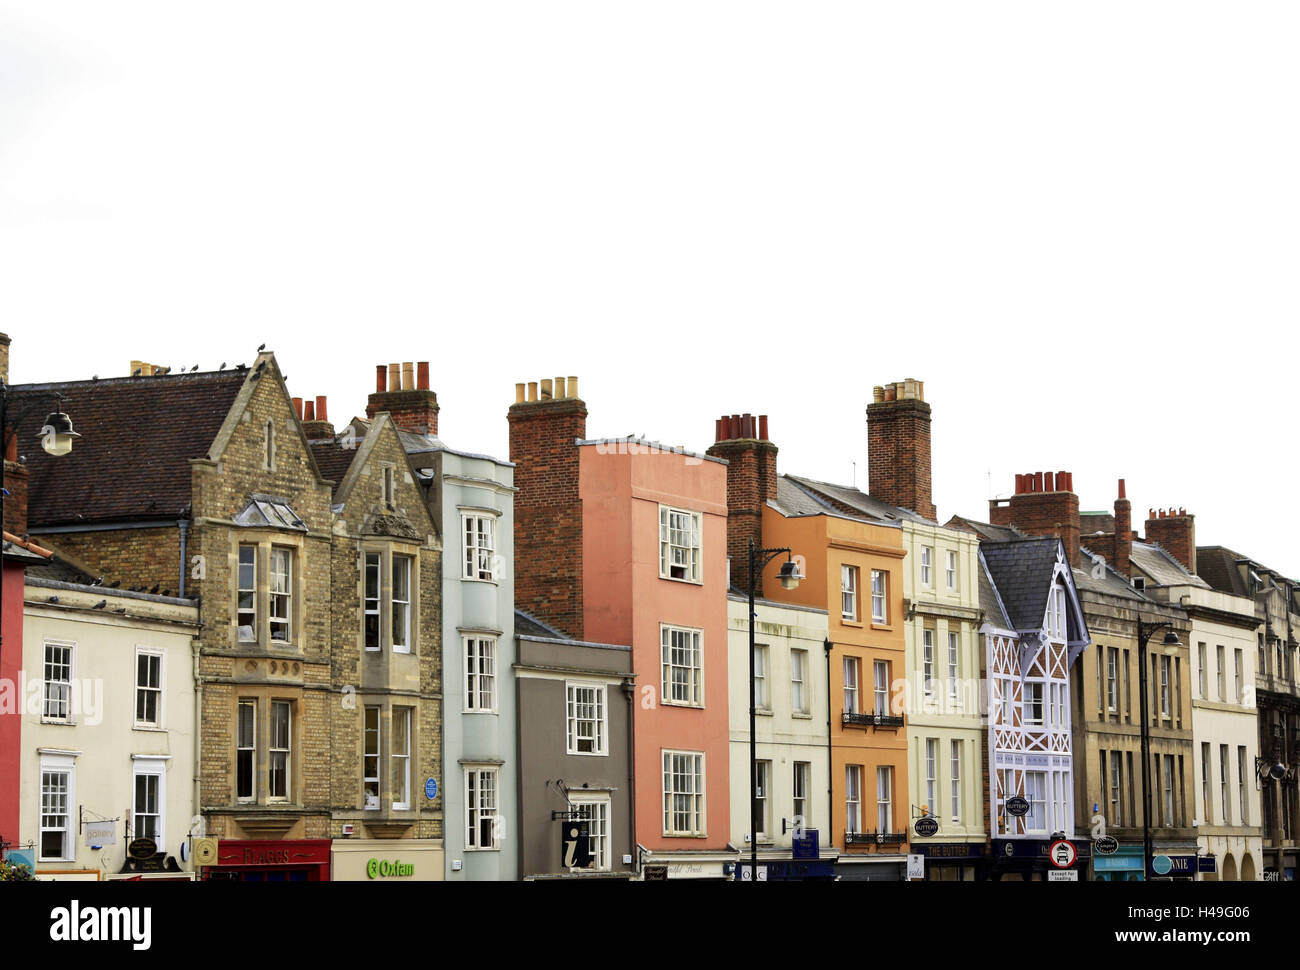 UK, Oxford, row of houses, England, city, houses, buildings, facades, multi-coloured, architecture, different, destination, tourism, place of interest, Stock Photo